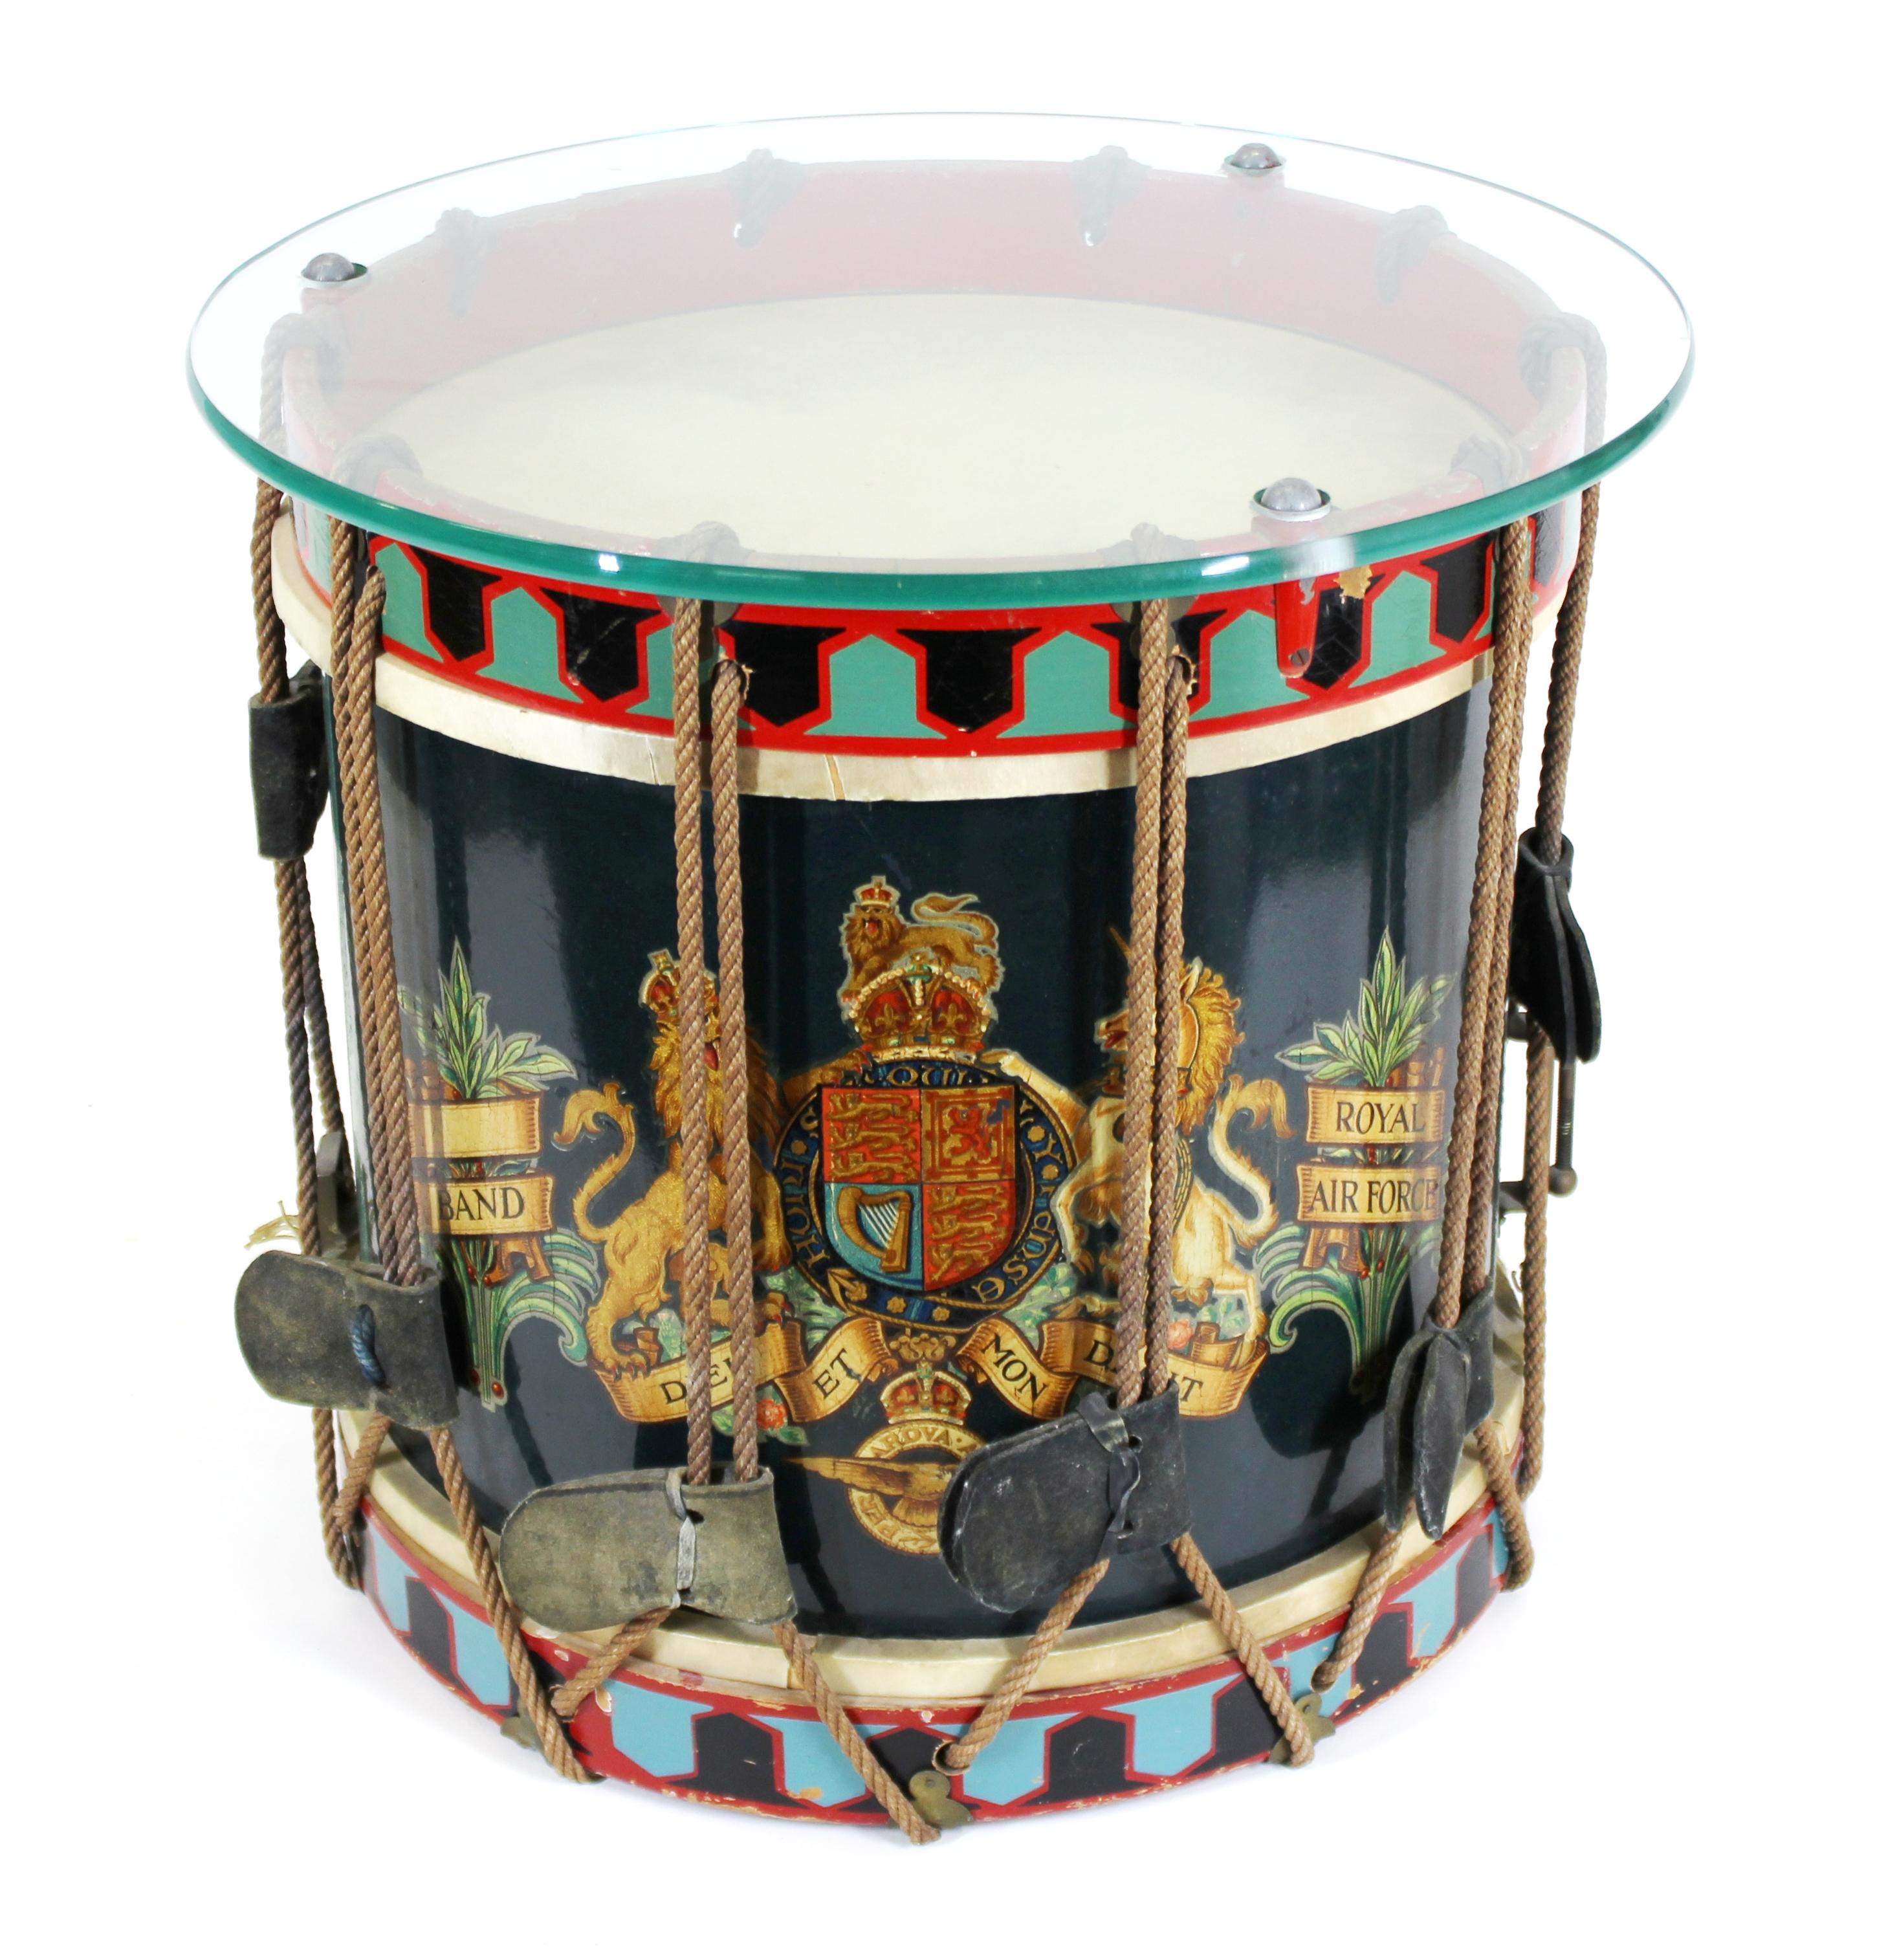 British Royal Air Force metal drum from the early 1940s, turned into a side table with a circular glass top. The piece has a hand painted full coat of arms on the front. Small hole in the top drum skin. A remarkable piece of British WWII memorabilia.